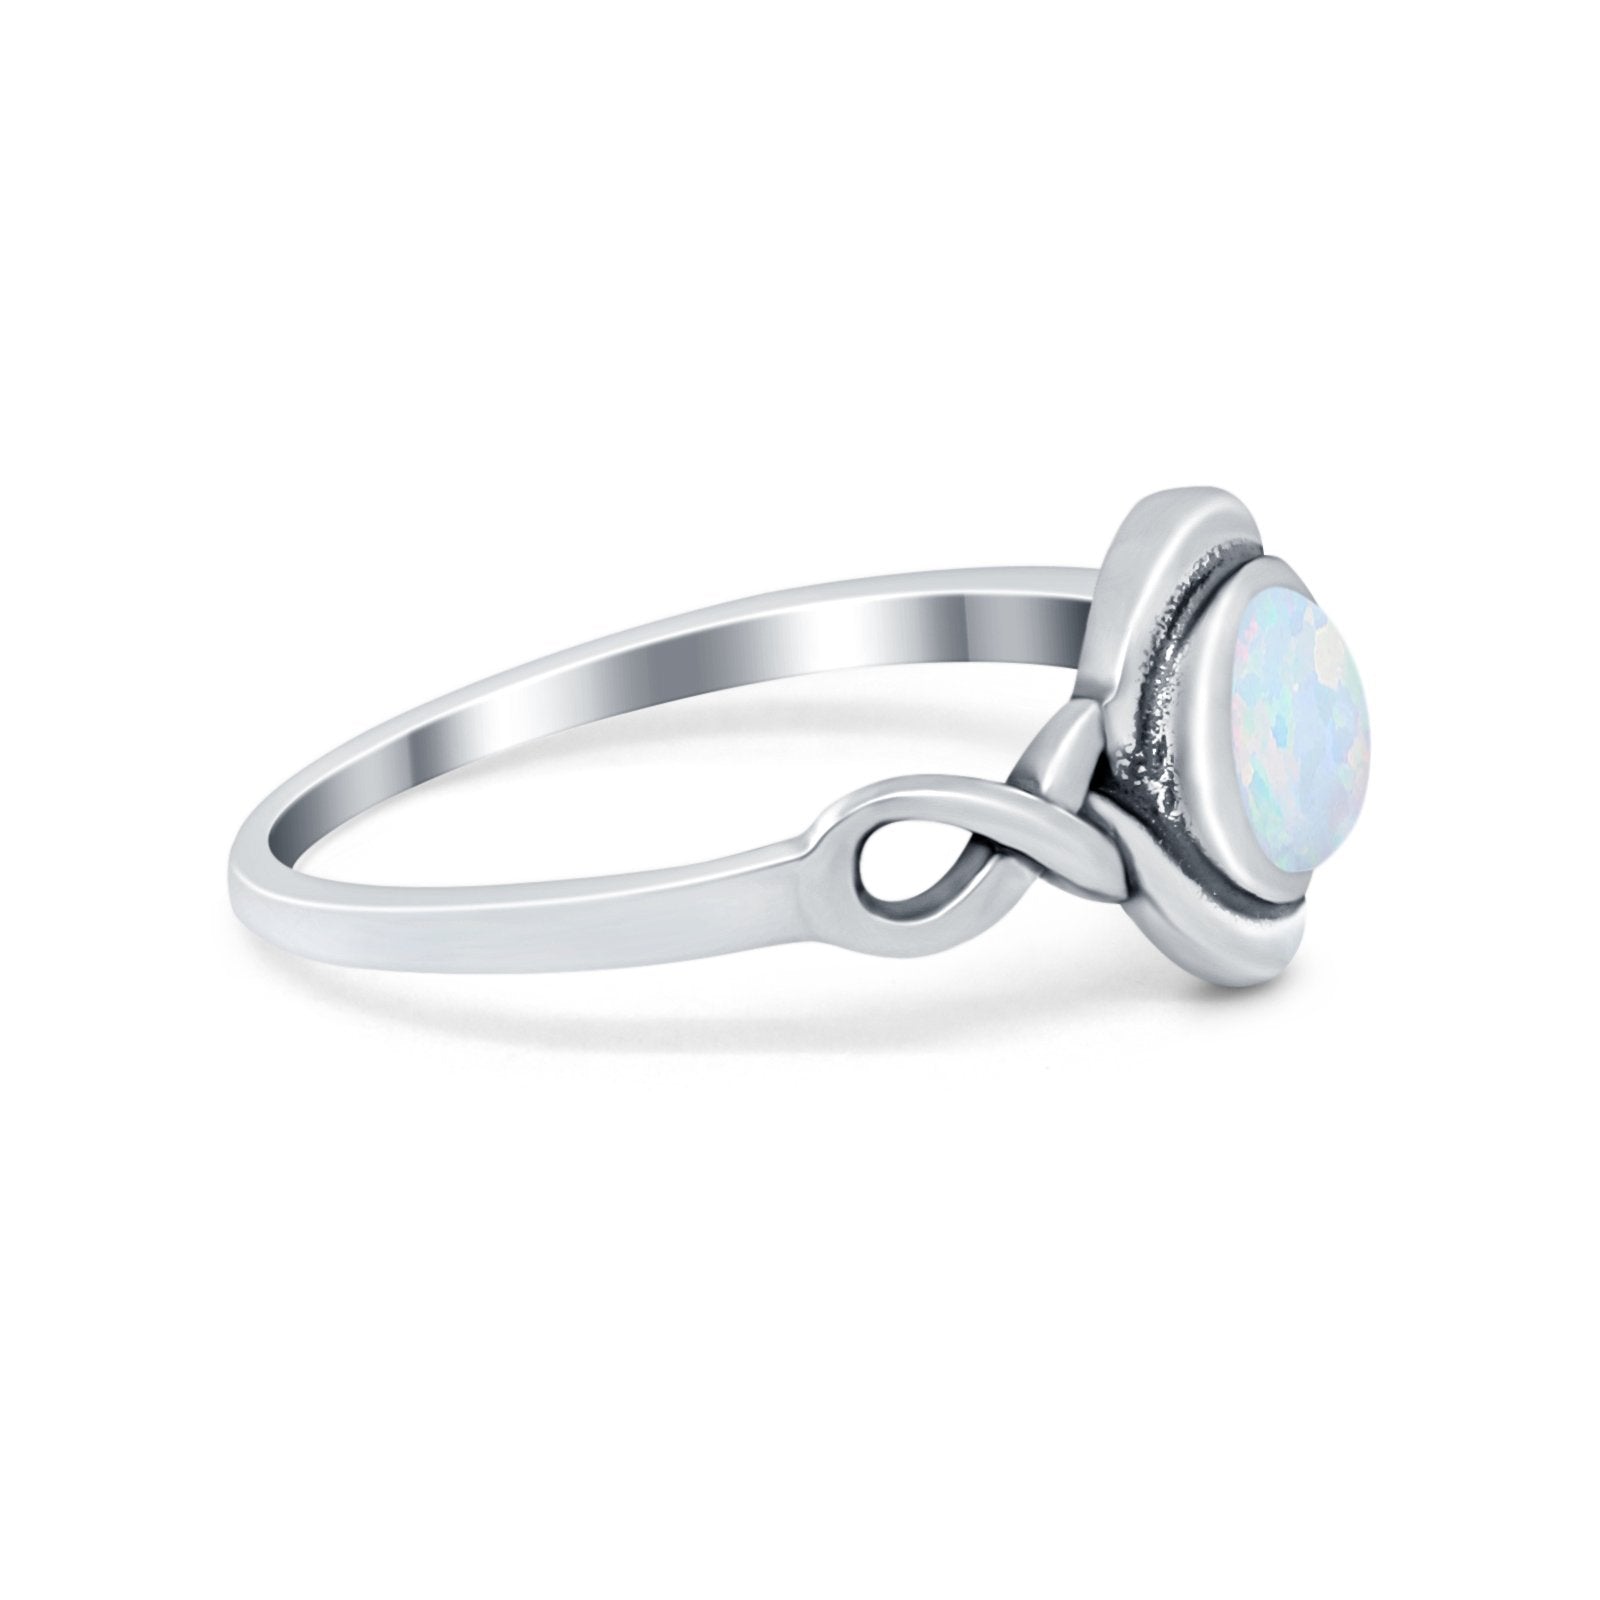 Celtic Trinity Ring Lab Created White Opal  Infinity Shank 925 Sterling Silver